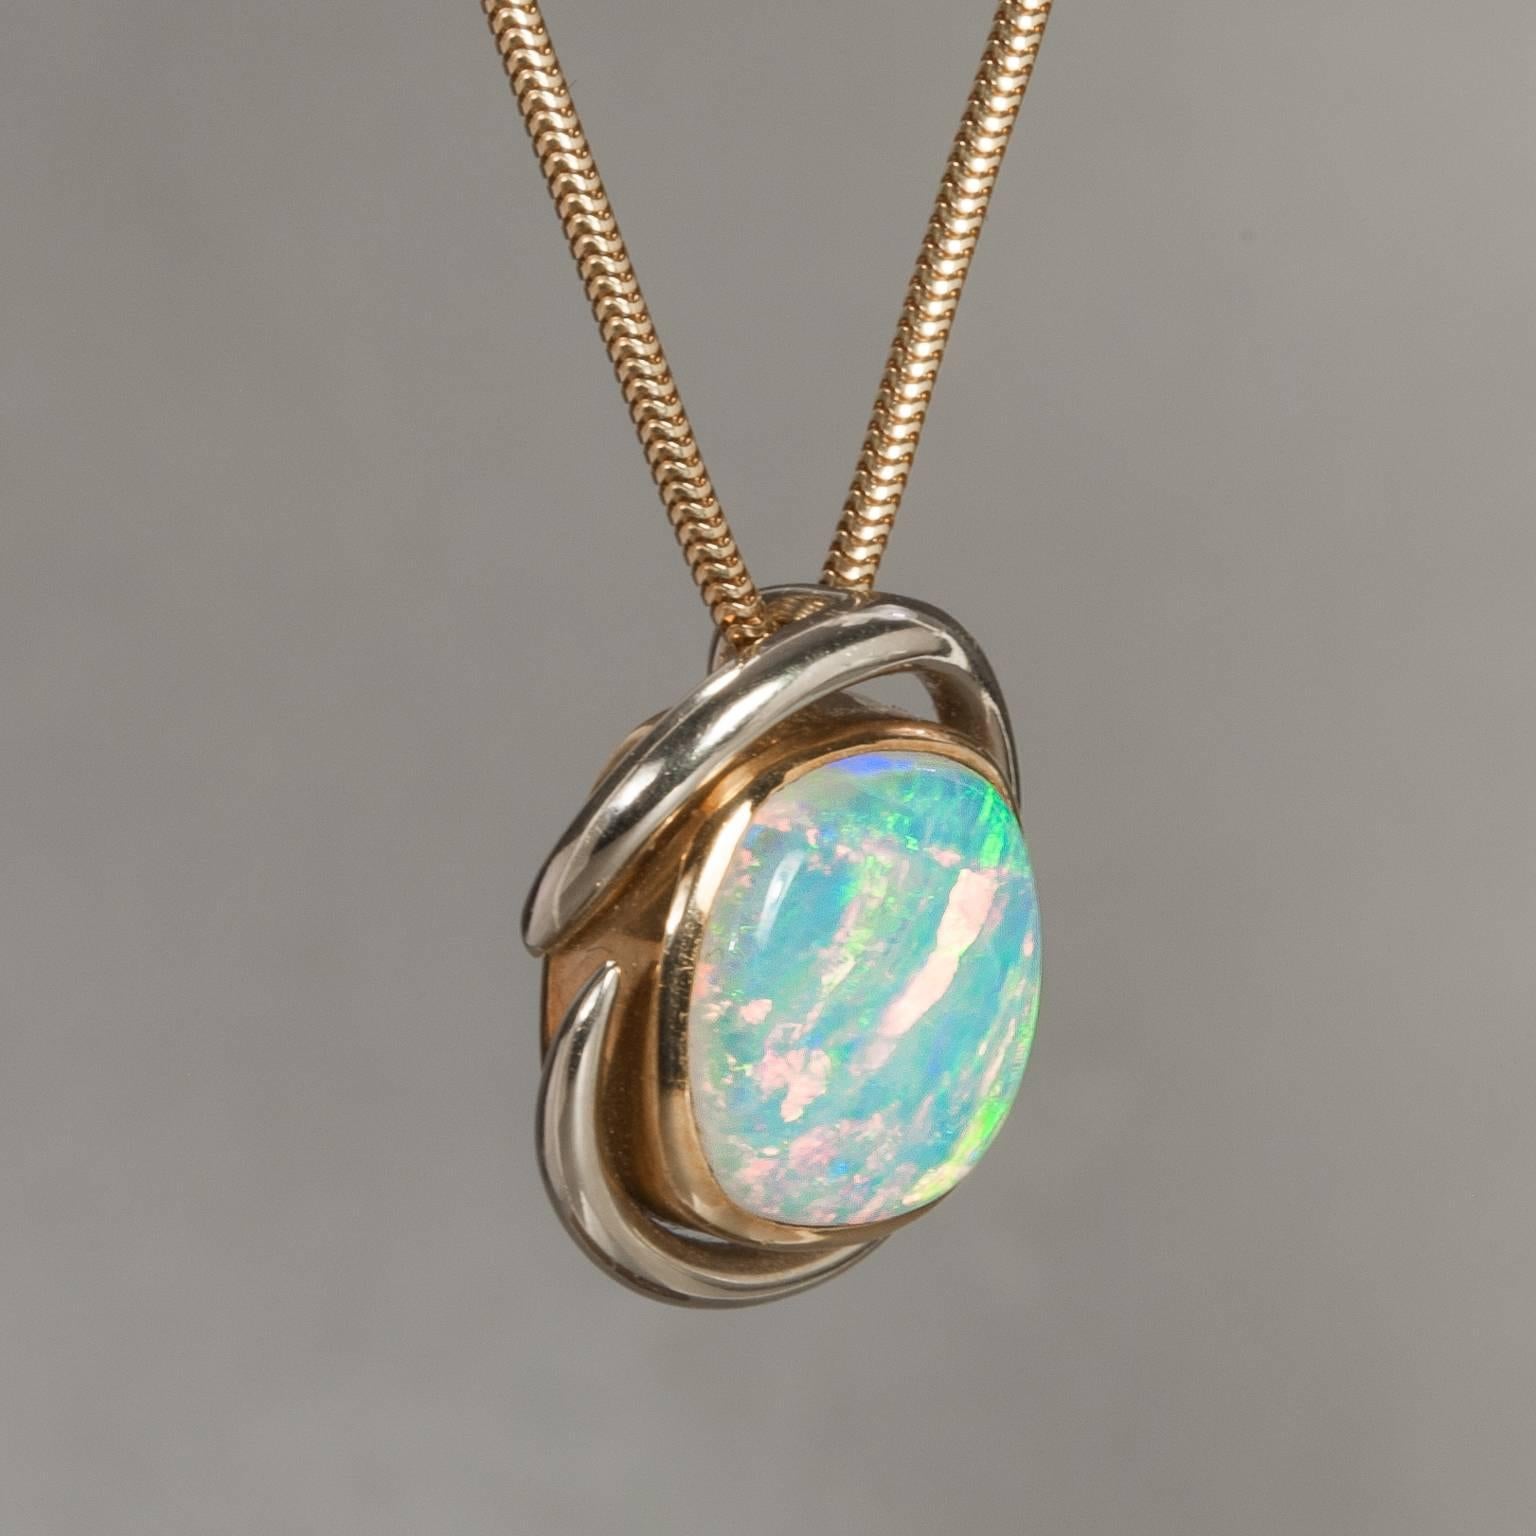 An elegant and curvaceous 5.00 carat Fire Opal pendant set in 18k white and yellow gold. This beautiful piece was crafted circa 1970 and comes on a short 15 inch snake chain in yellow gold.